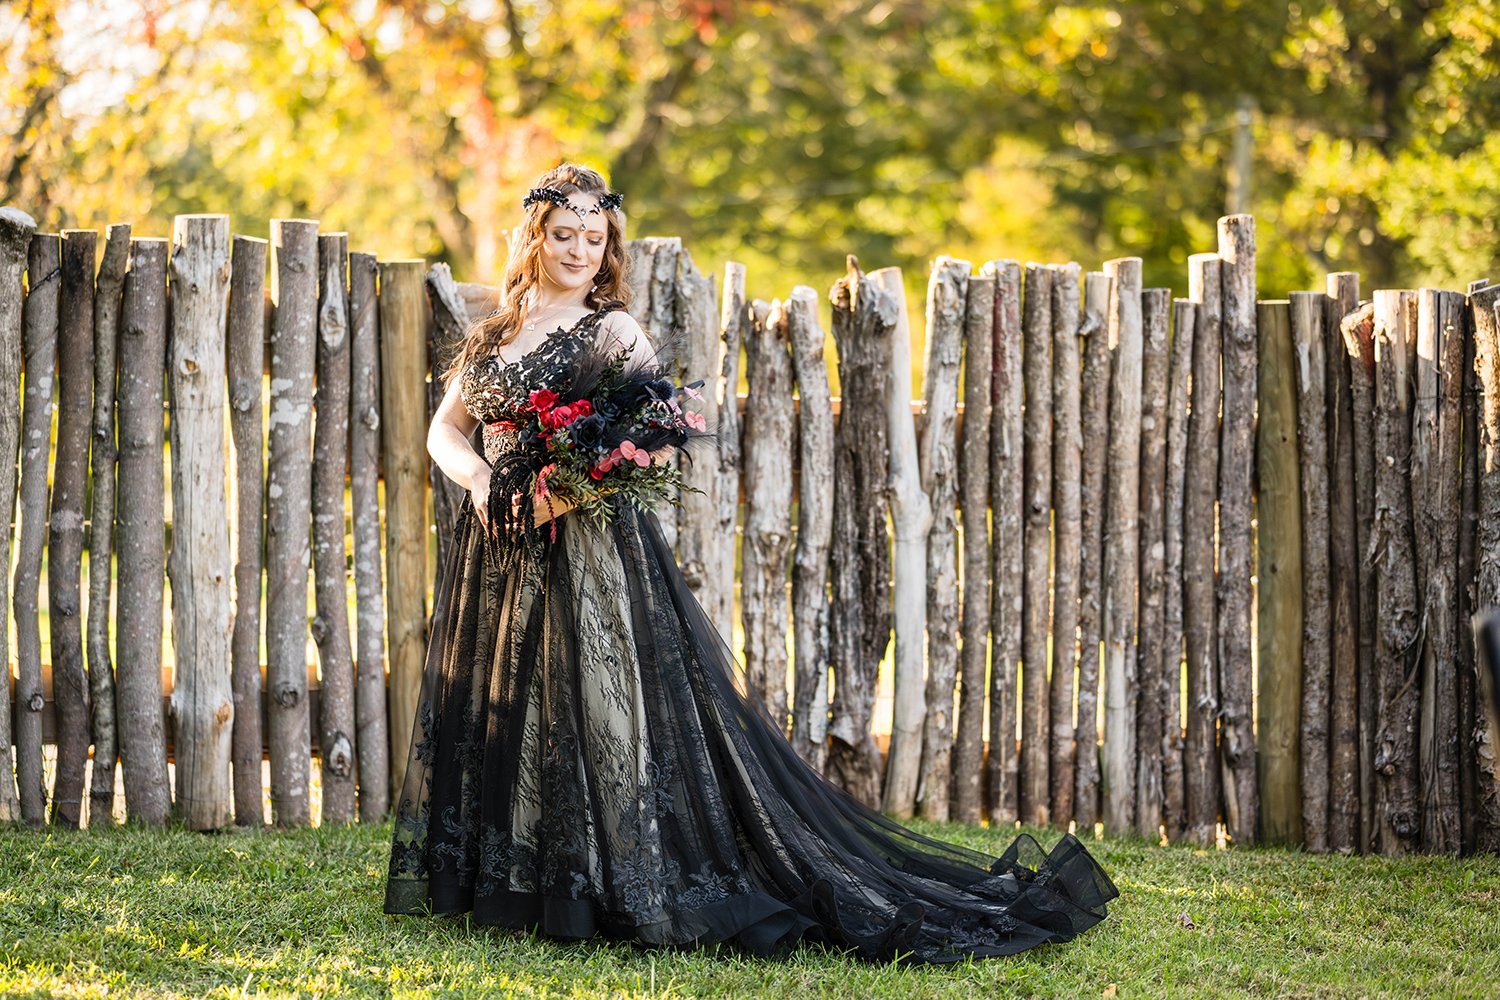 A lesbian marrier wears a black wedding dress and holds a wedding bouquet against a wooden log fence in the yard during their elopement.